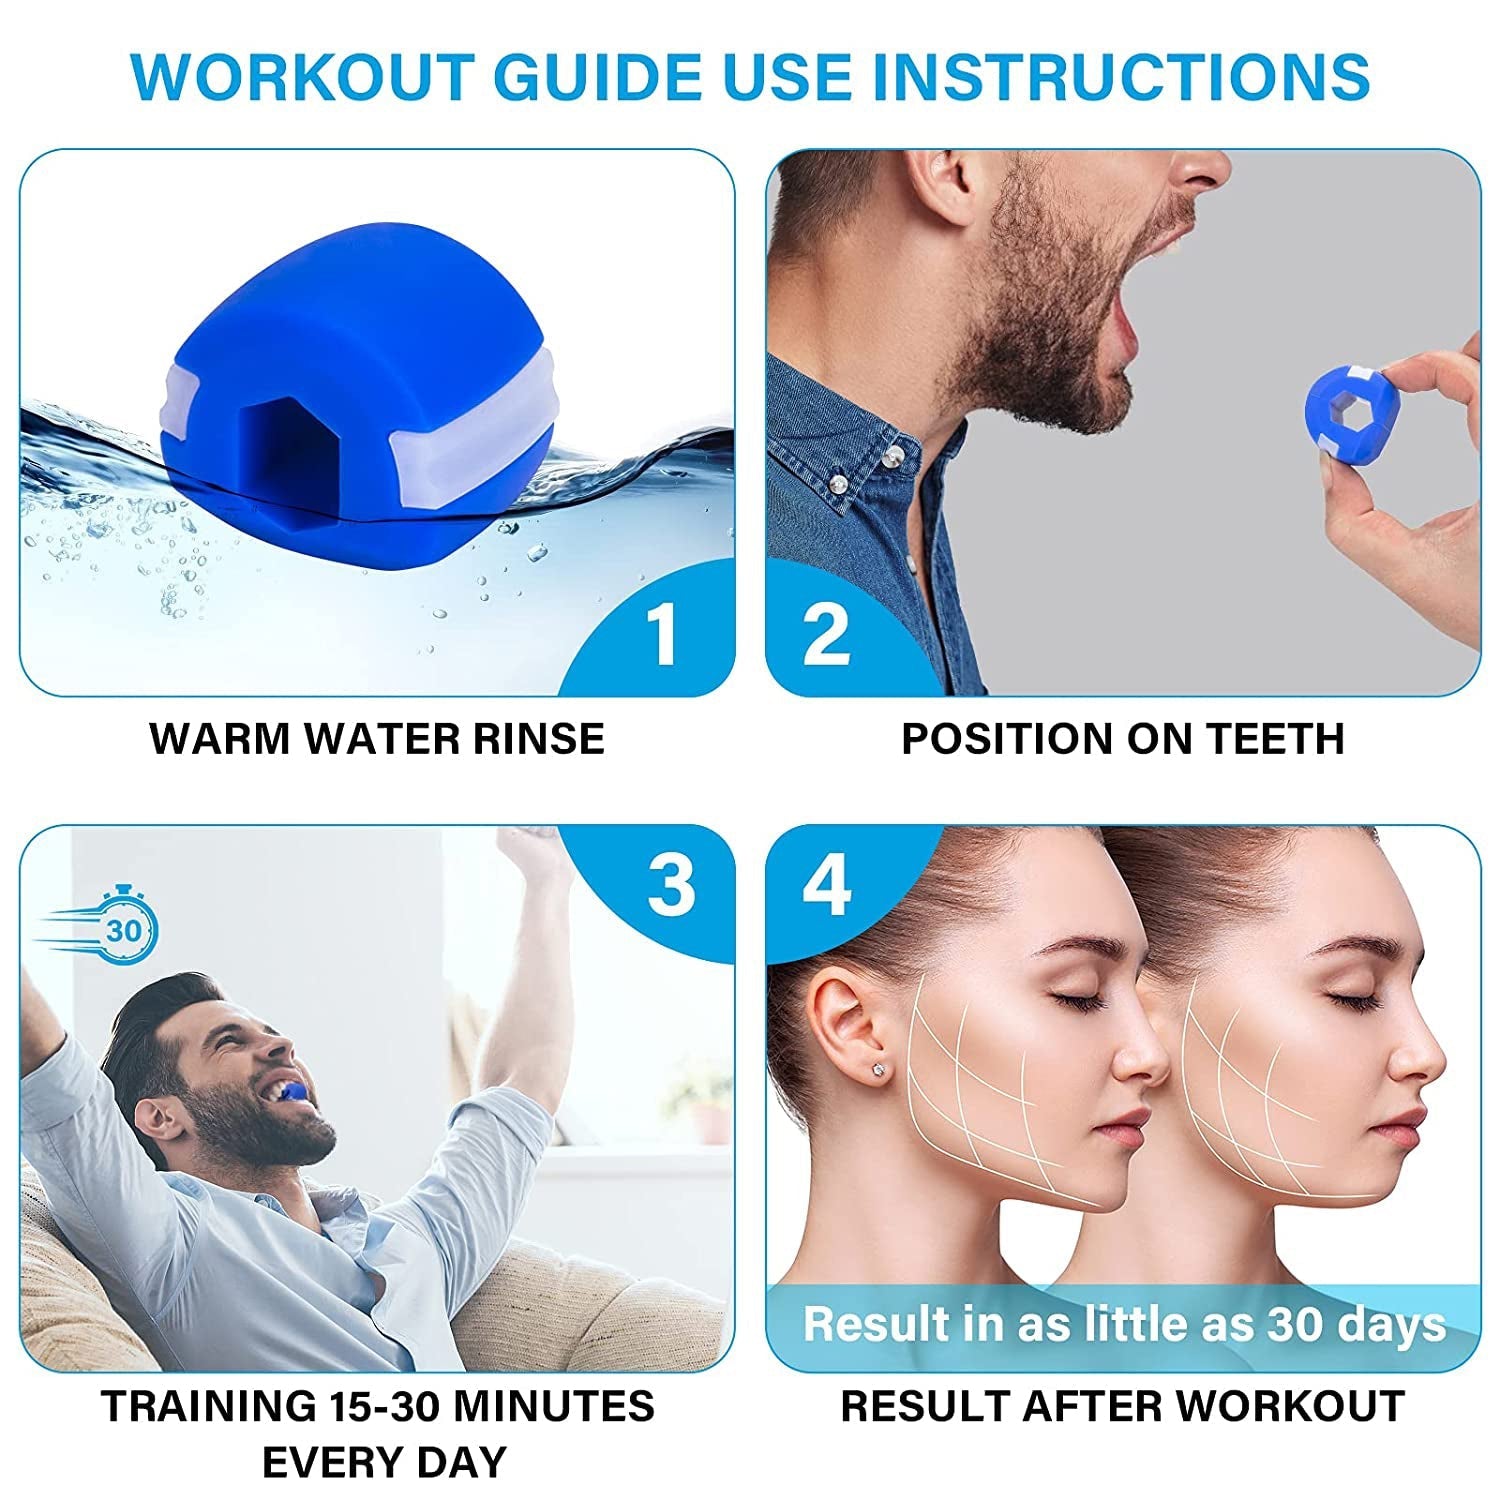 6101V Jawline Exerciser Jaw, Face, and Neck Exerciser, Slim and Tone Your Face, Jaw Exerciser For Men & Women, Neck Toning, Facial Exerciser (Blue color) jawline workout freeshipping - DeoDap